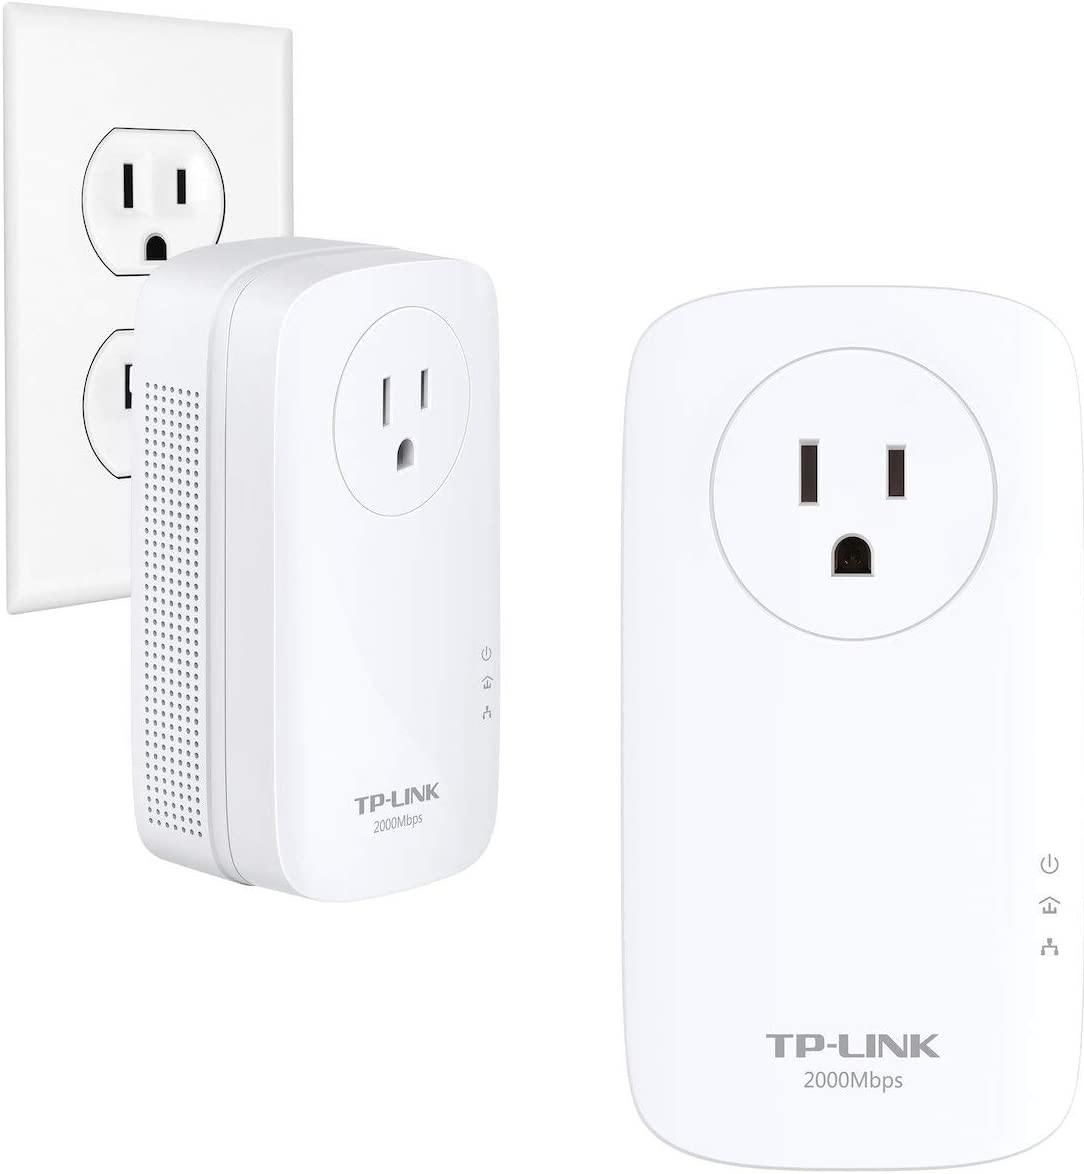 TP-Link AV2000 Powerline Adapter - 2 Gigabit Ports, Ethernet Over Power, Plug&amp;Play, Power Saving, 2x2 MIMO, Noise Filtering, Extra Power Socket for other Devices, Ideal for Gaming (TL-PA9020P KIT) AV2000, 2 Ports